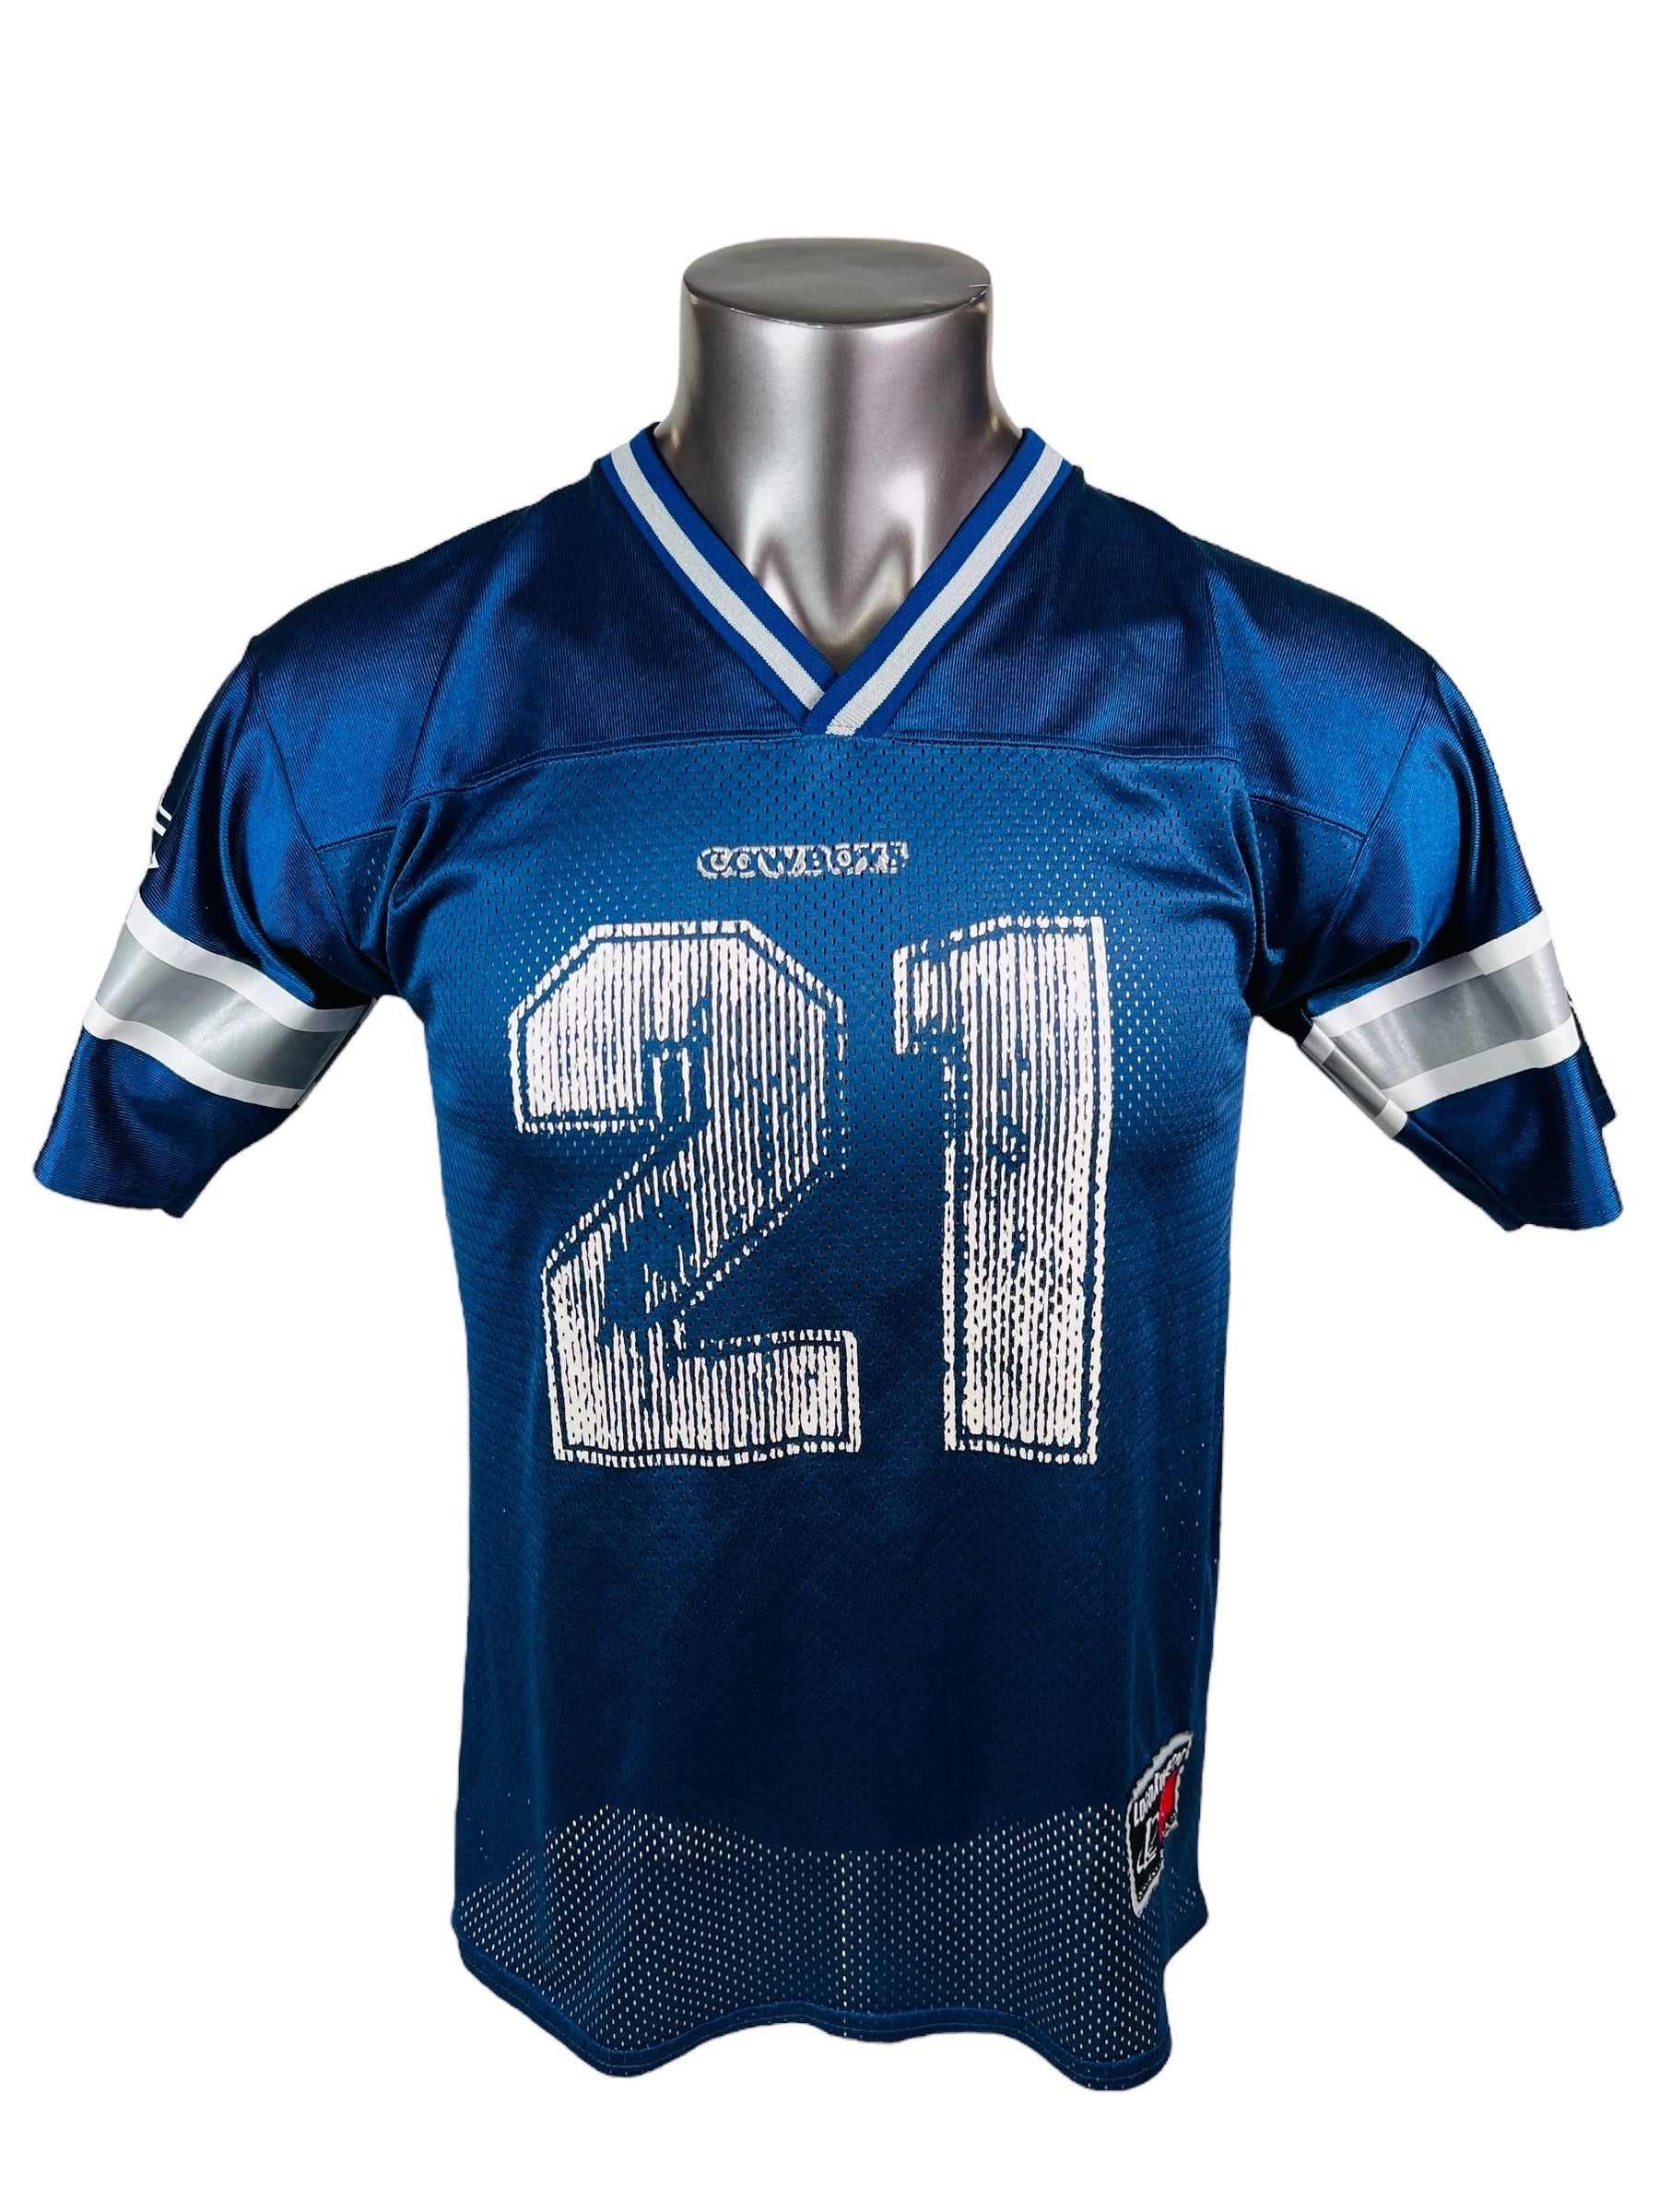 youth xl cowboys jersey